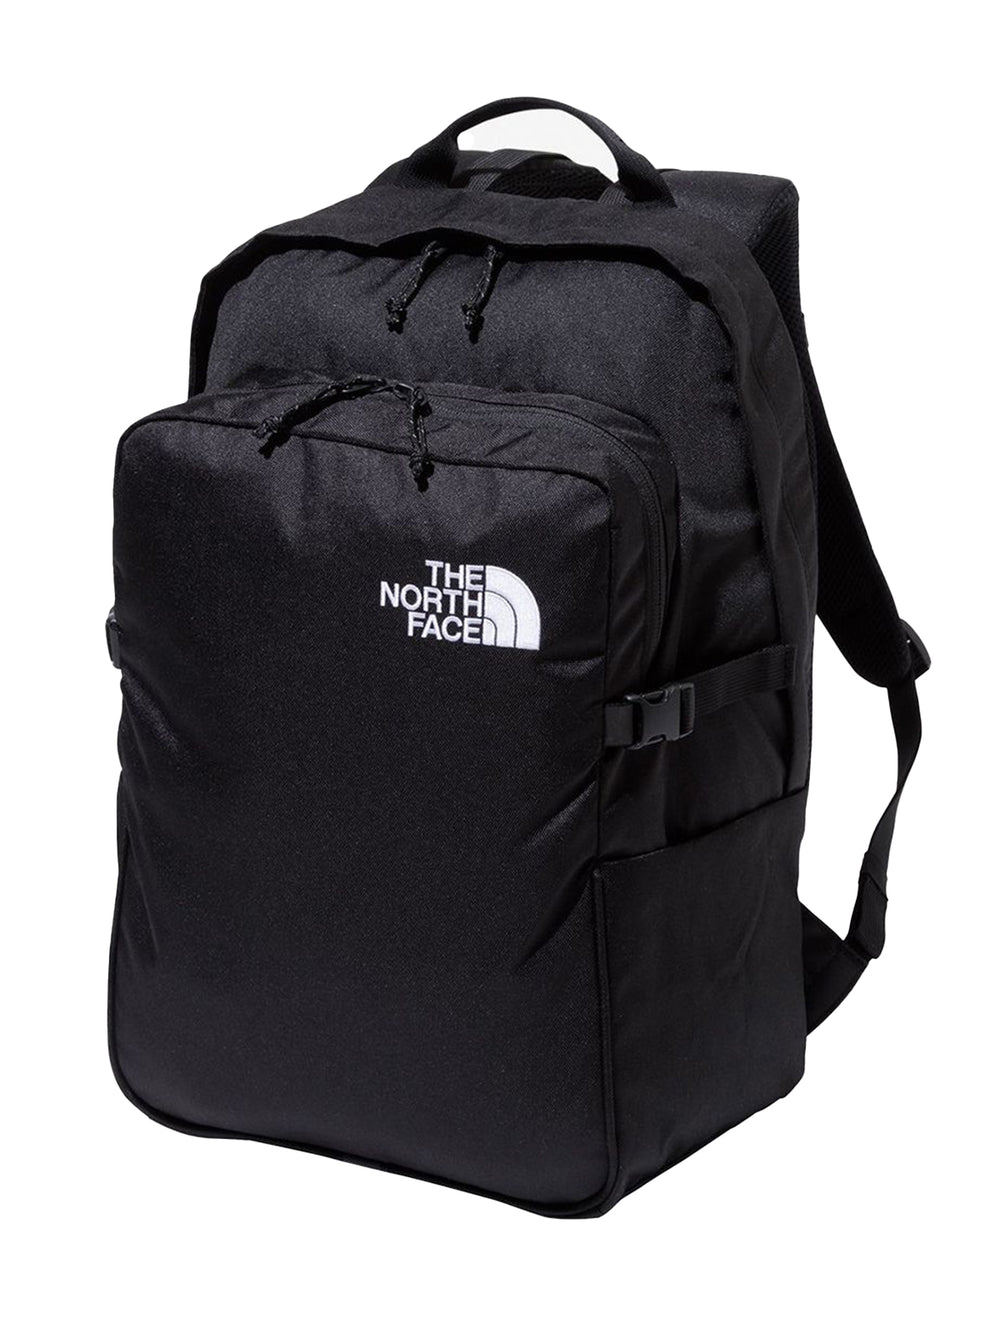 [SALE10%OFF][THE NORTH FACE] Boulder Daypack The North Face Unisex Outdoor Backpack Large Capacity Commuter / 23SS NM72250